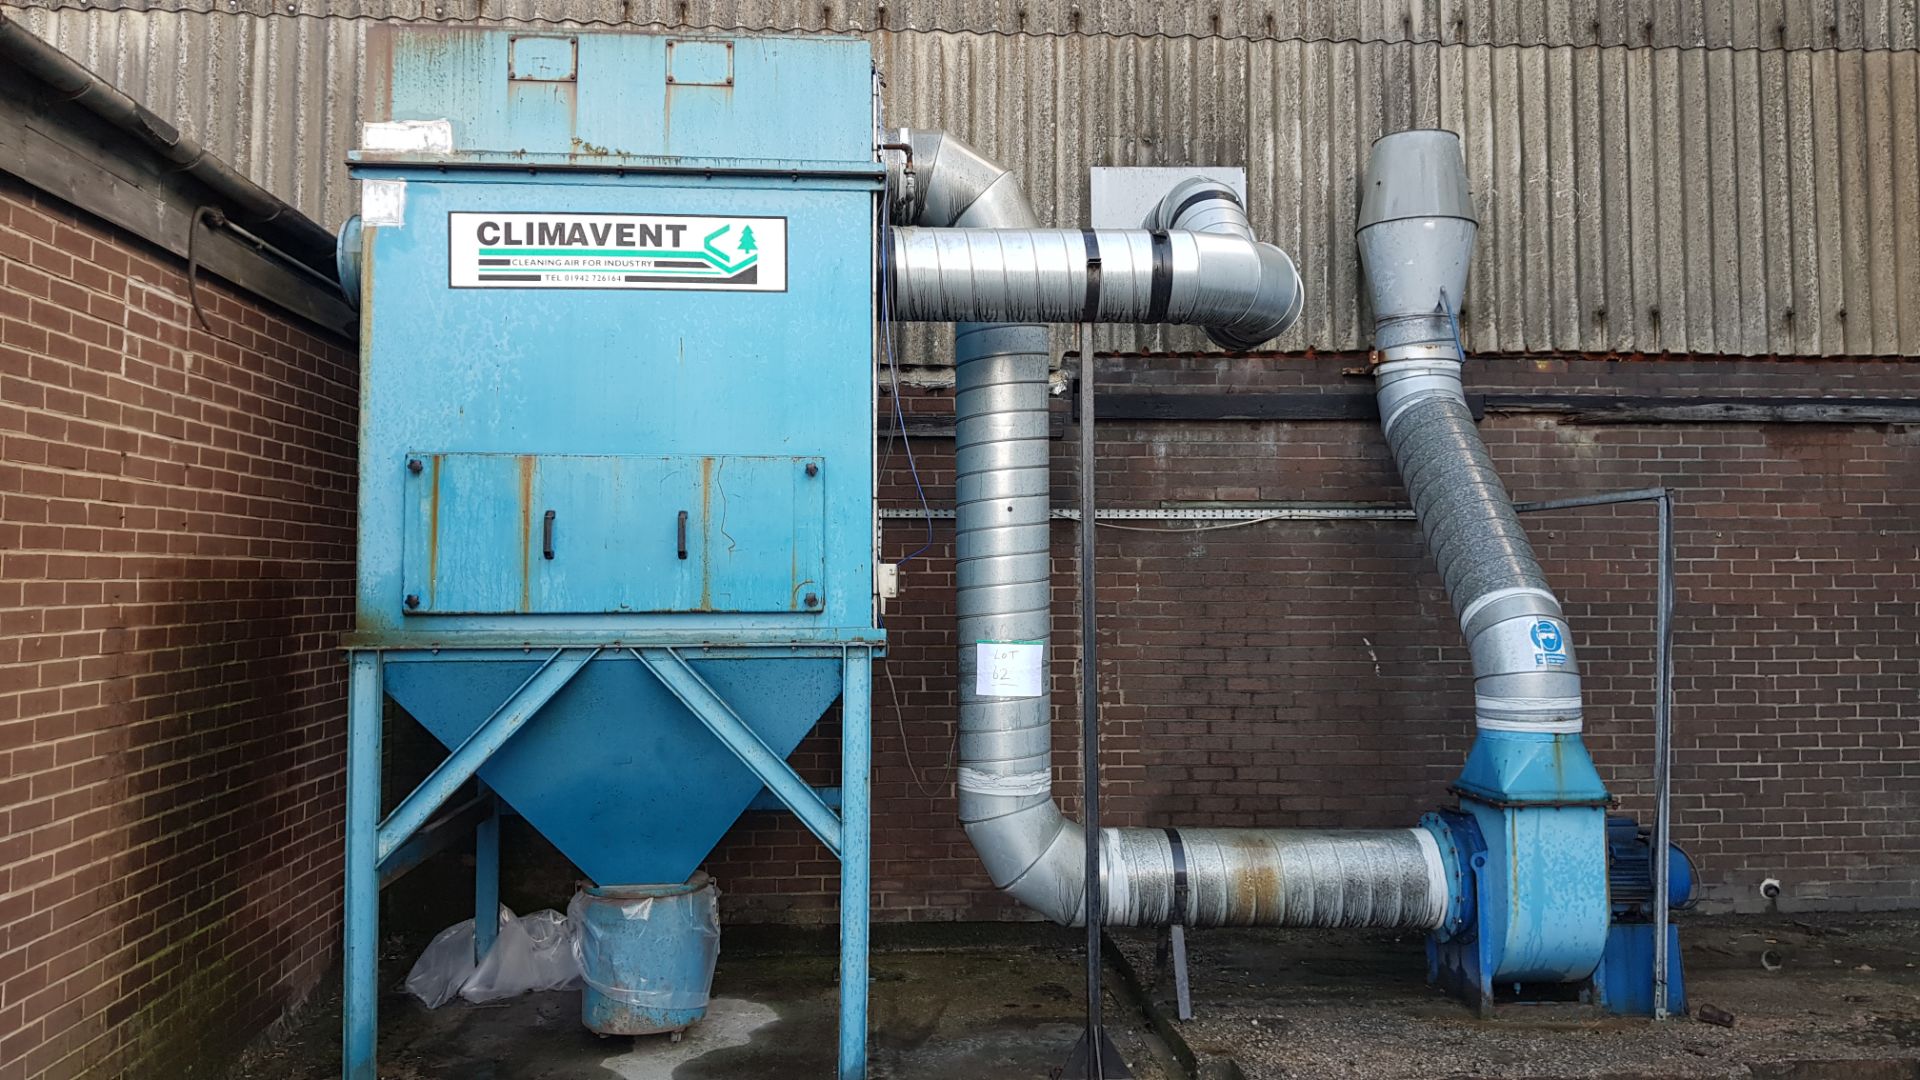 CLIMAVENT 6 CARTRIDGE FILTER COMMERCIAL EXTRACTION SYSTEM WITH REVERSE AIR PULSE CLEANING AND